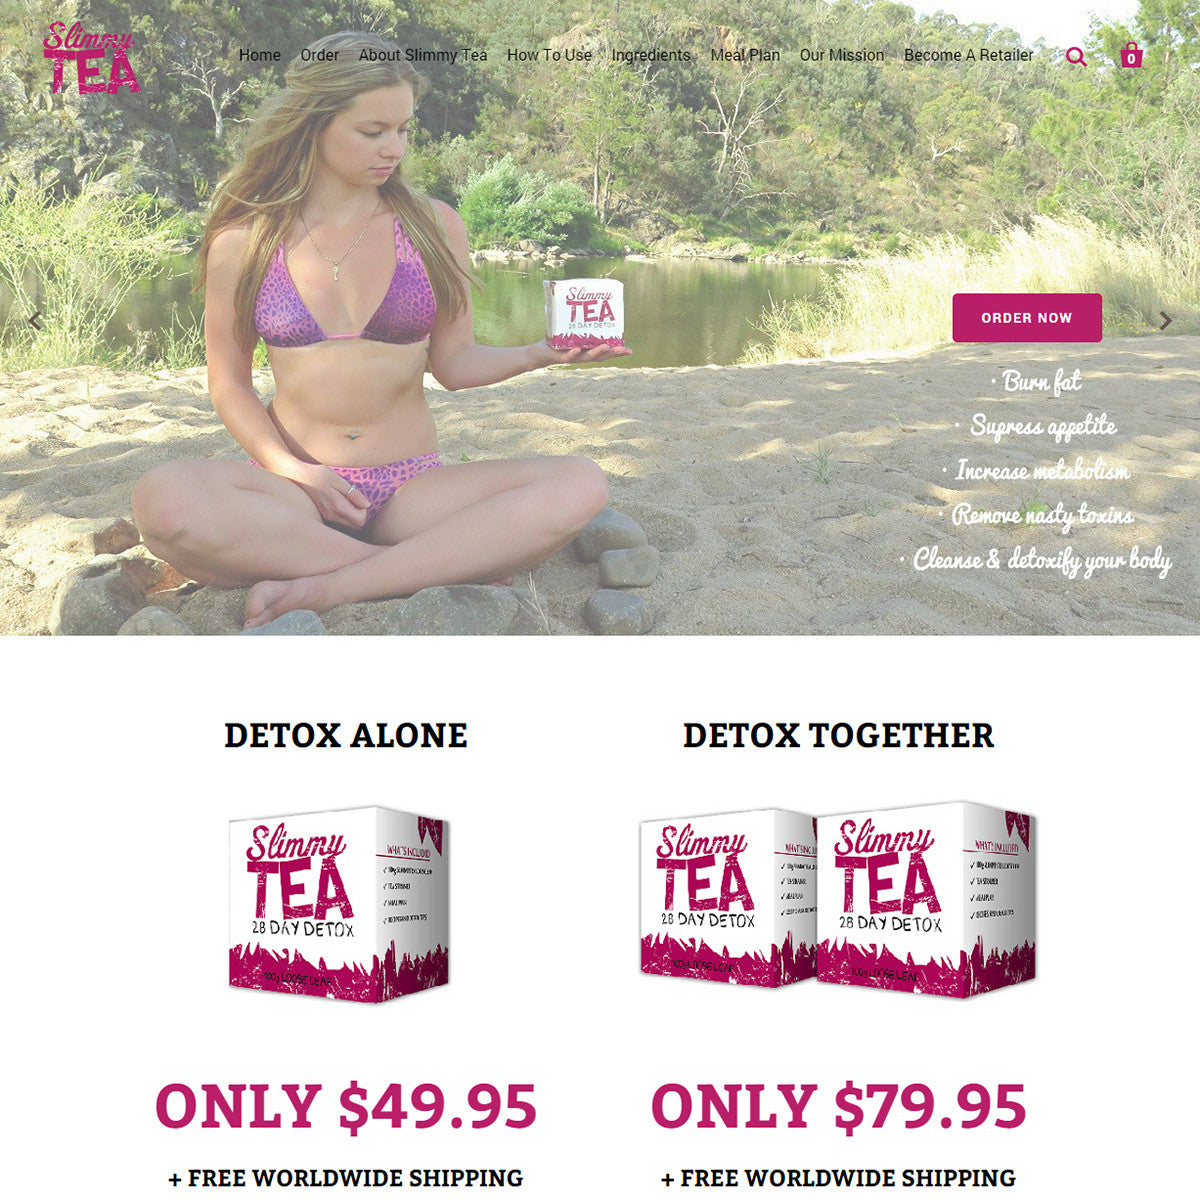 Slimmy Tea - Photography and Web Design - Los Angeles, US based Shopify Experts Revo Designs